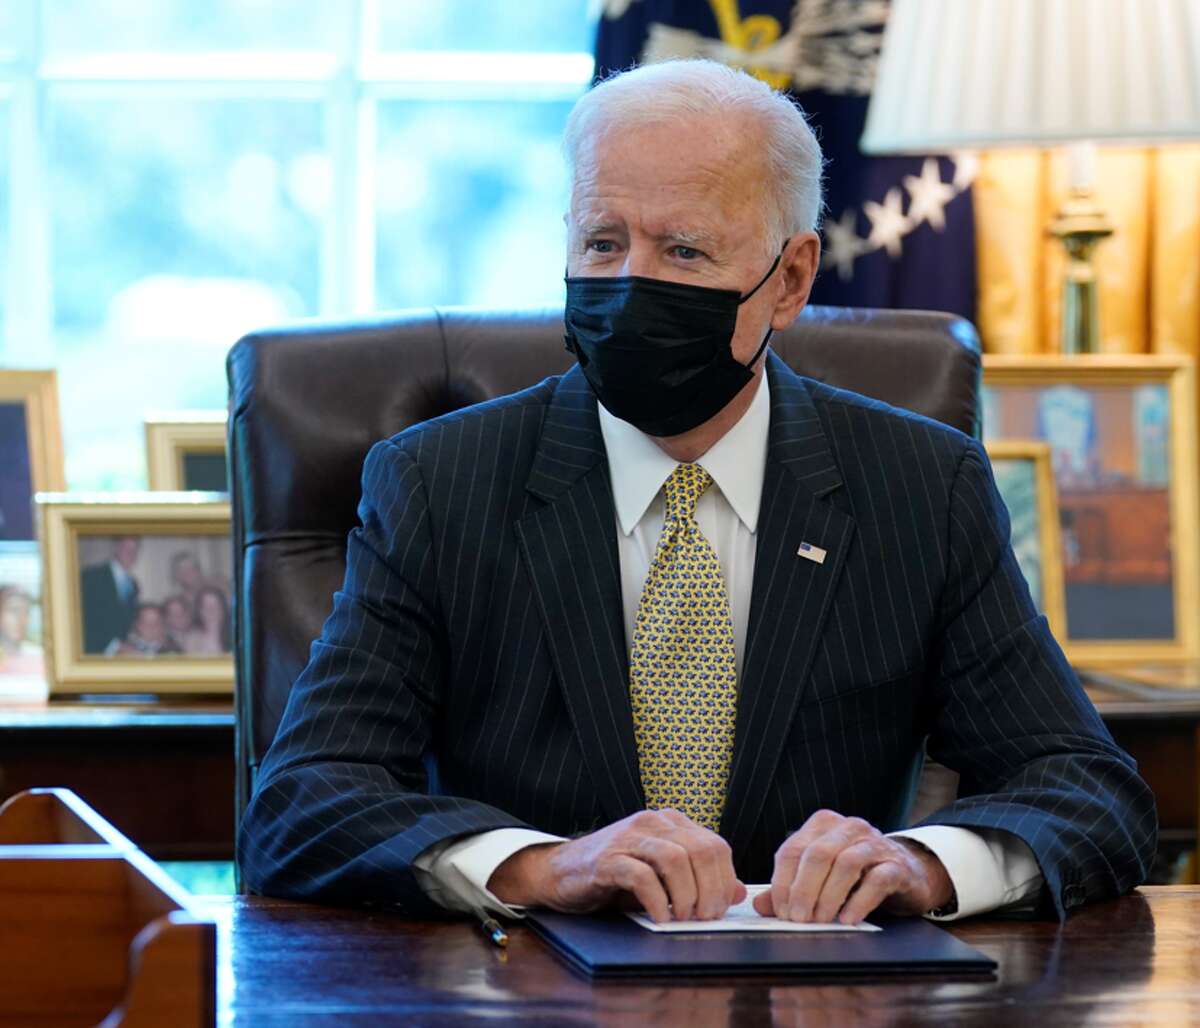 President Joe Biden approved small business assistance loans at the height of the pandemic.